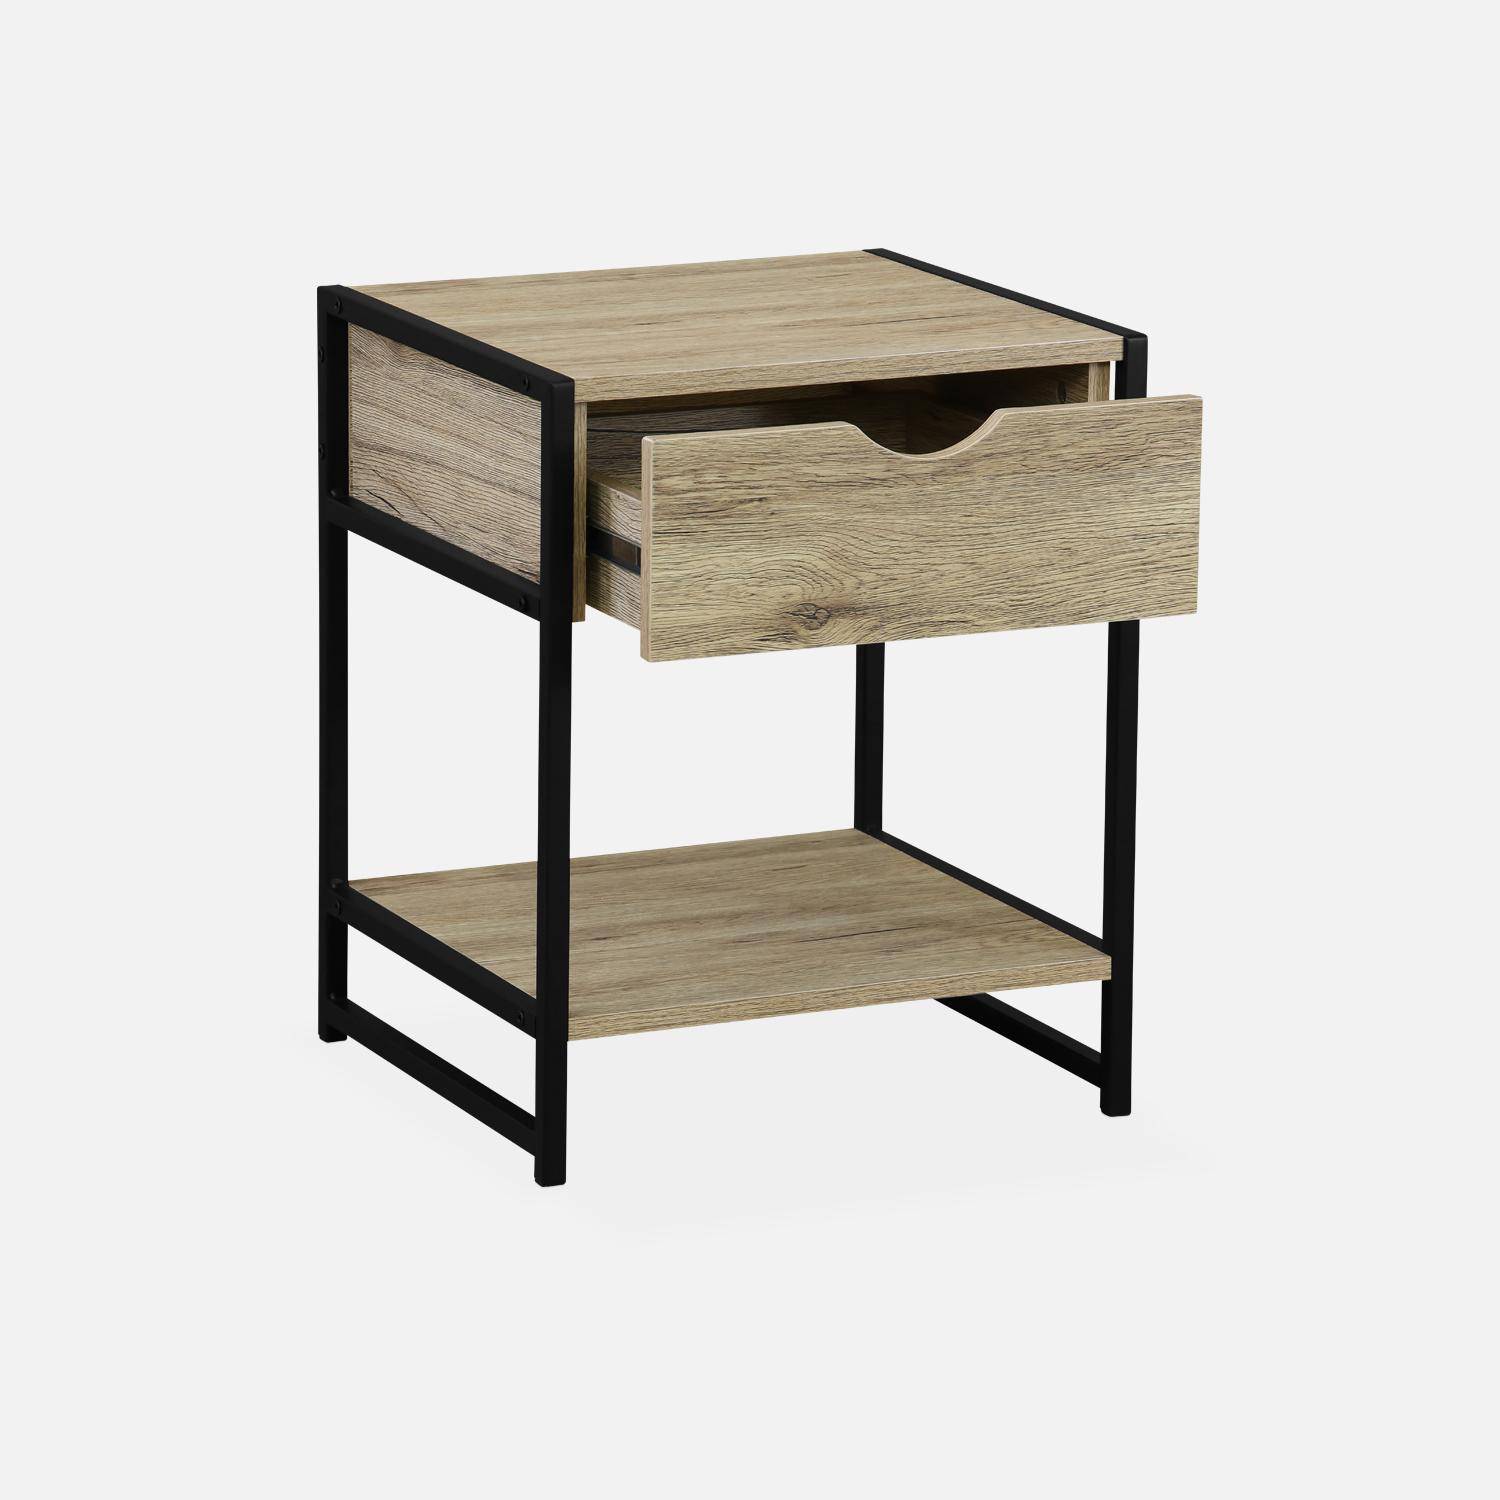 Pair of metal and wood-effect bedside tables with drawer and shelf, 40x40x50cm - Loft Photo7